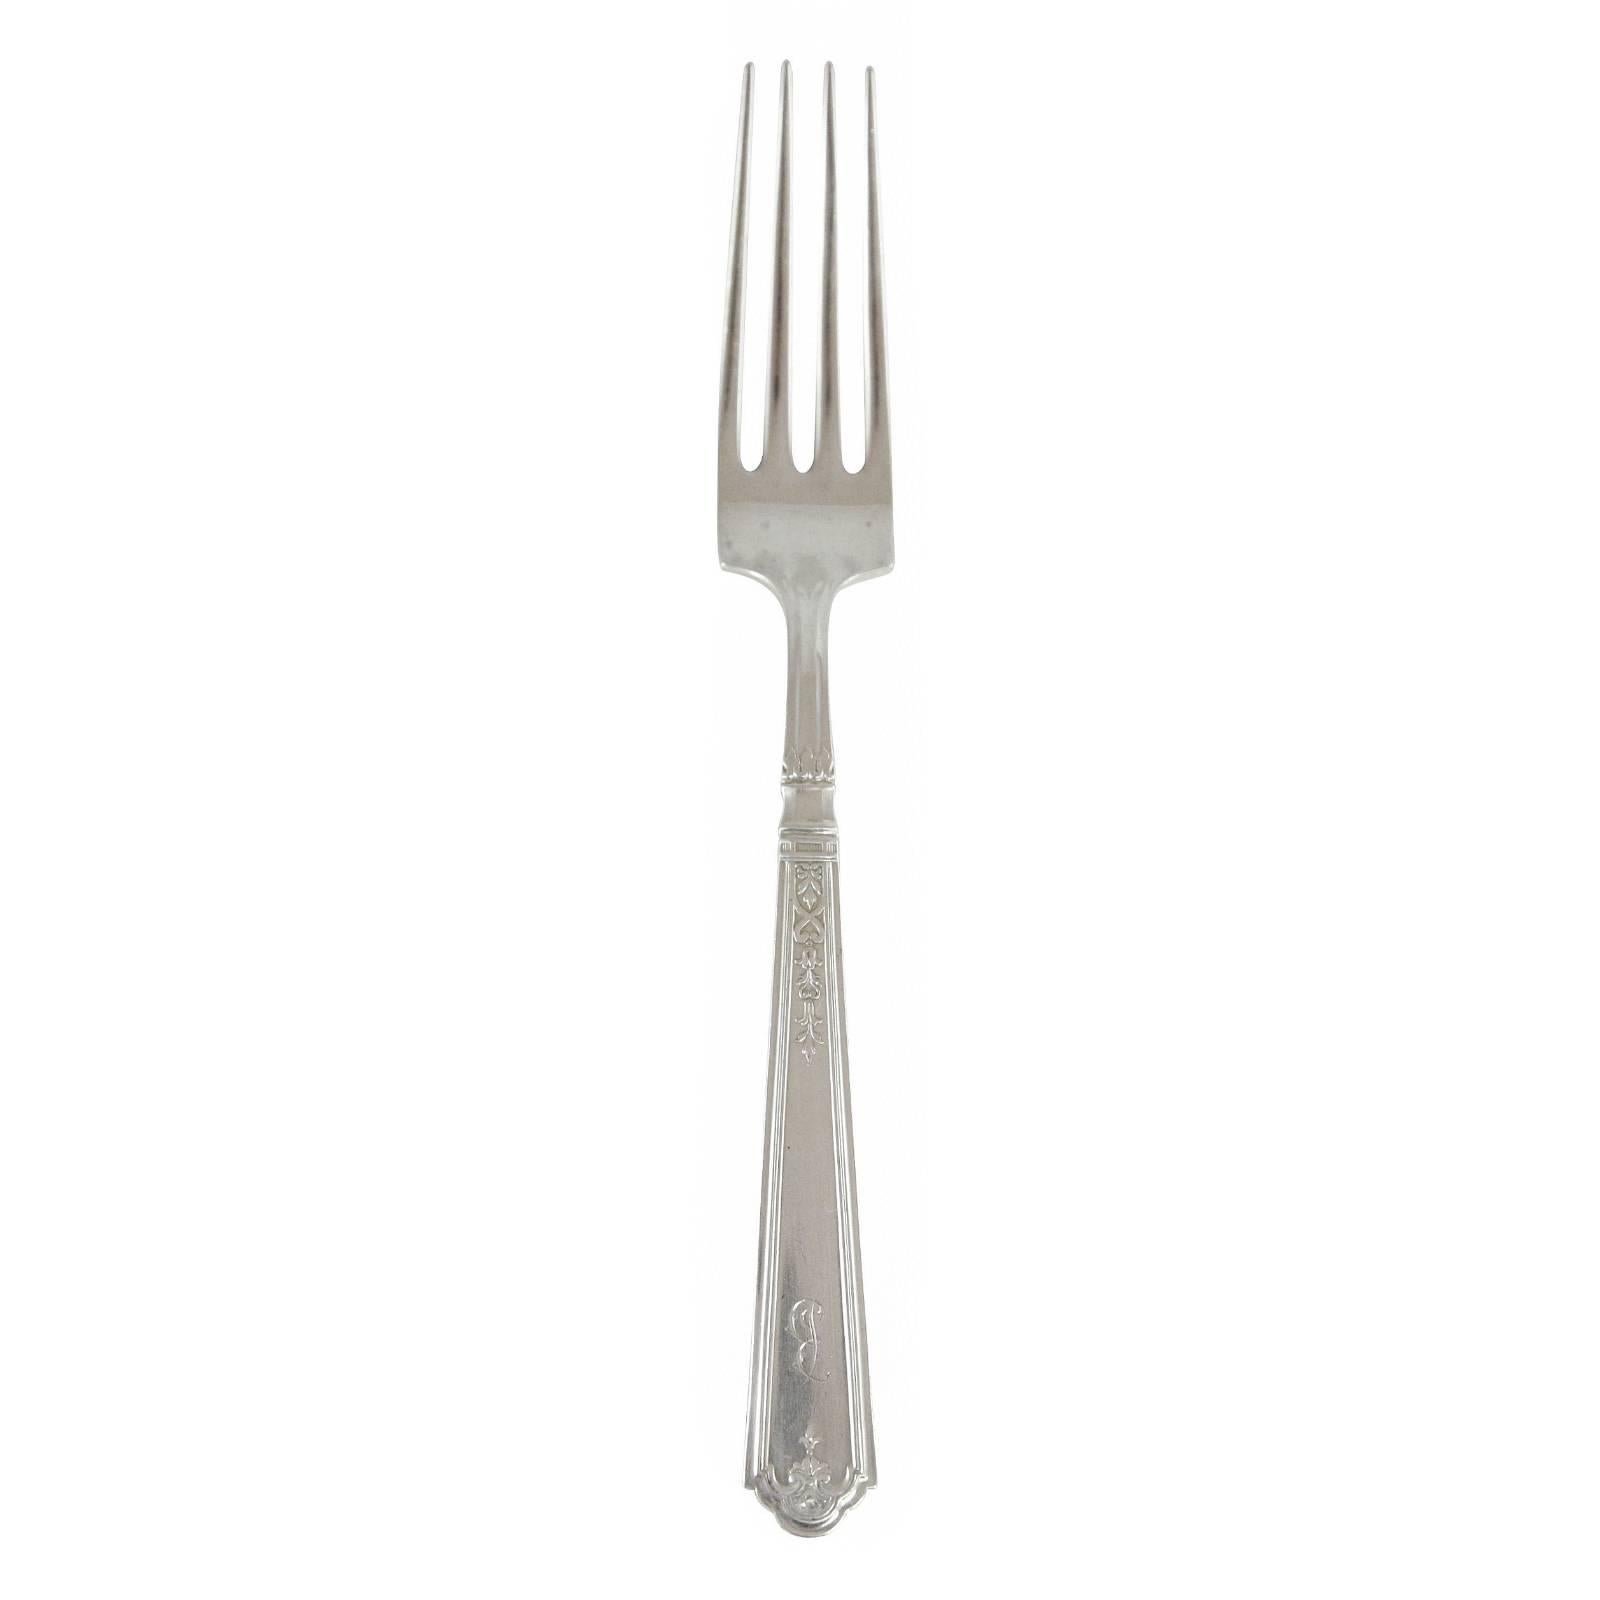 A sterling silver flatware set by Gorham in the ‘Princess Patricia’ pattern, as designed by Axel H. Staf. Princess Patricia was originally designed for William B. Durgin Co, a silver manufacturer which was purchased by Gorham in 1924. Durgin